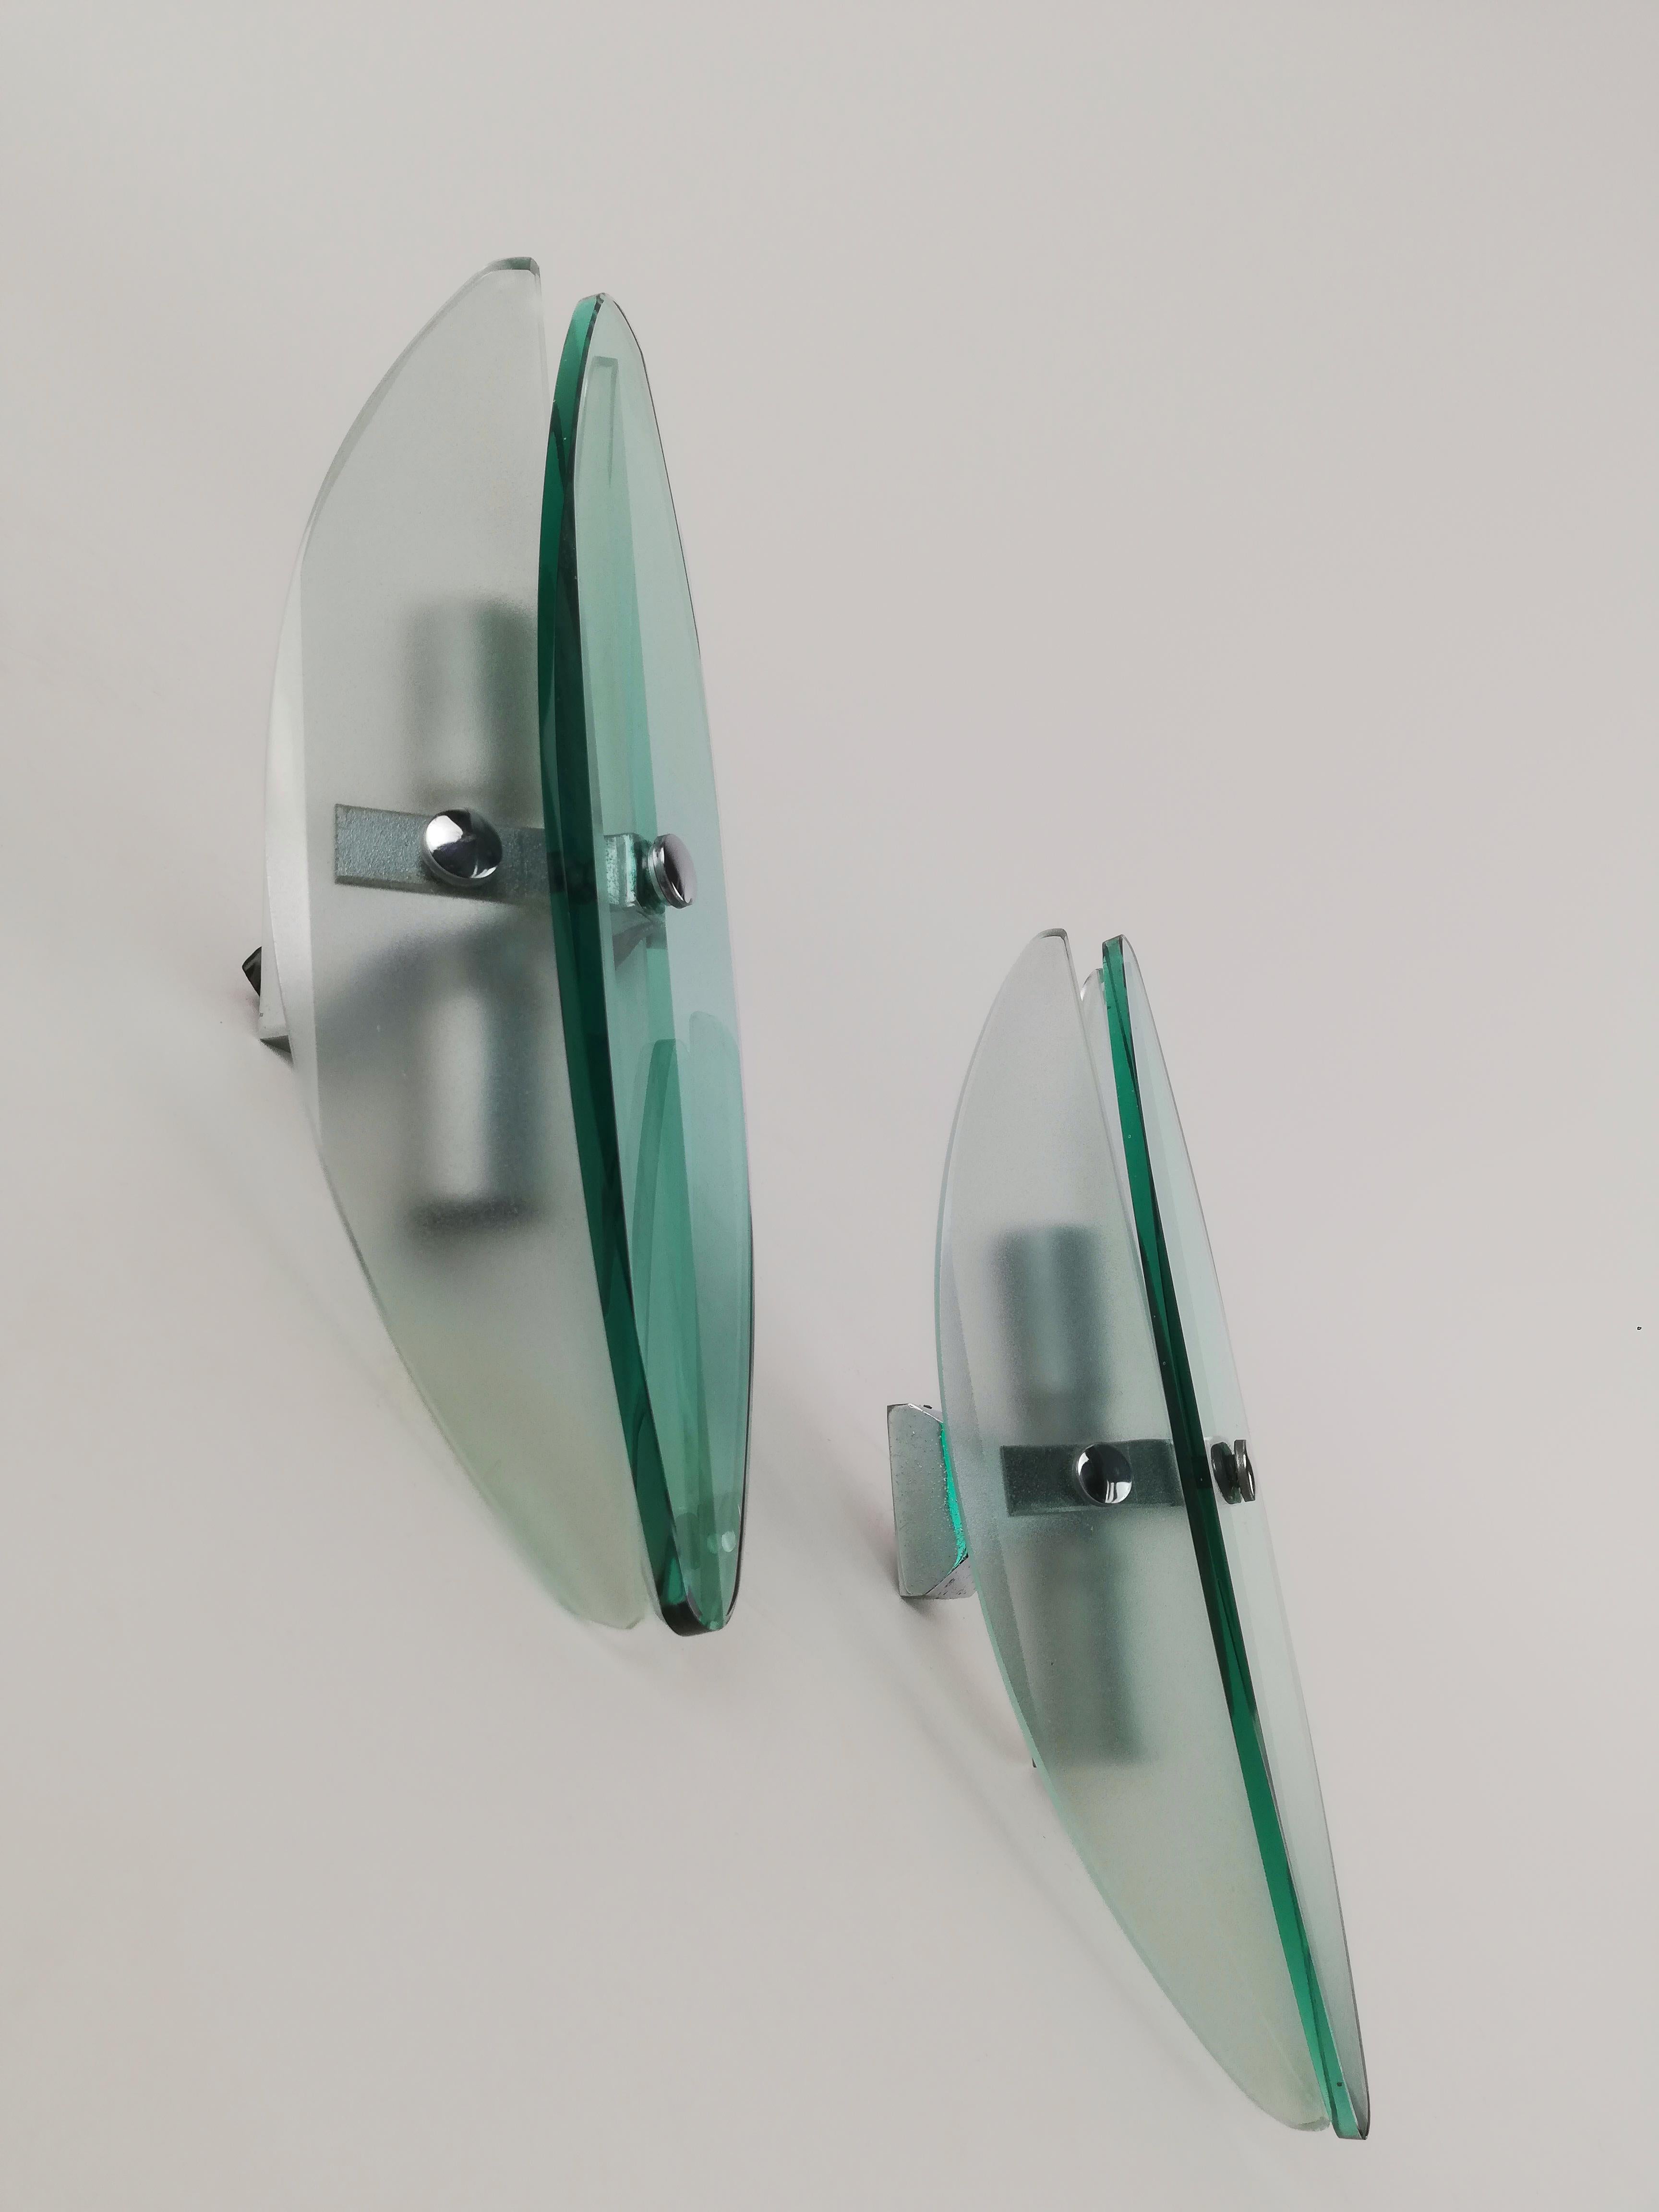 A pair of vintage sconces datable between the 1960s and 1970s of the 20th century.
These Italian wall lights are attributable to the 